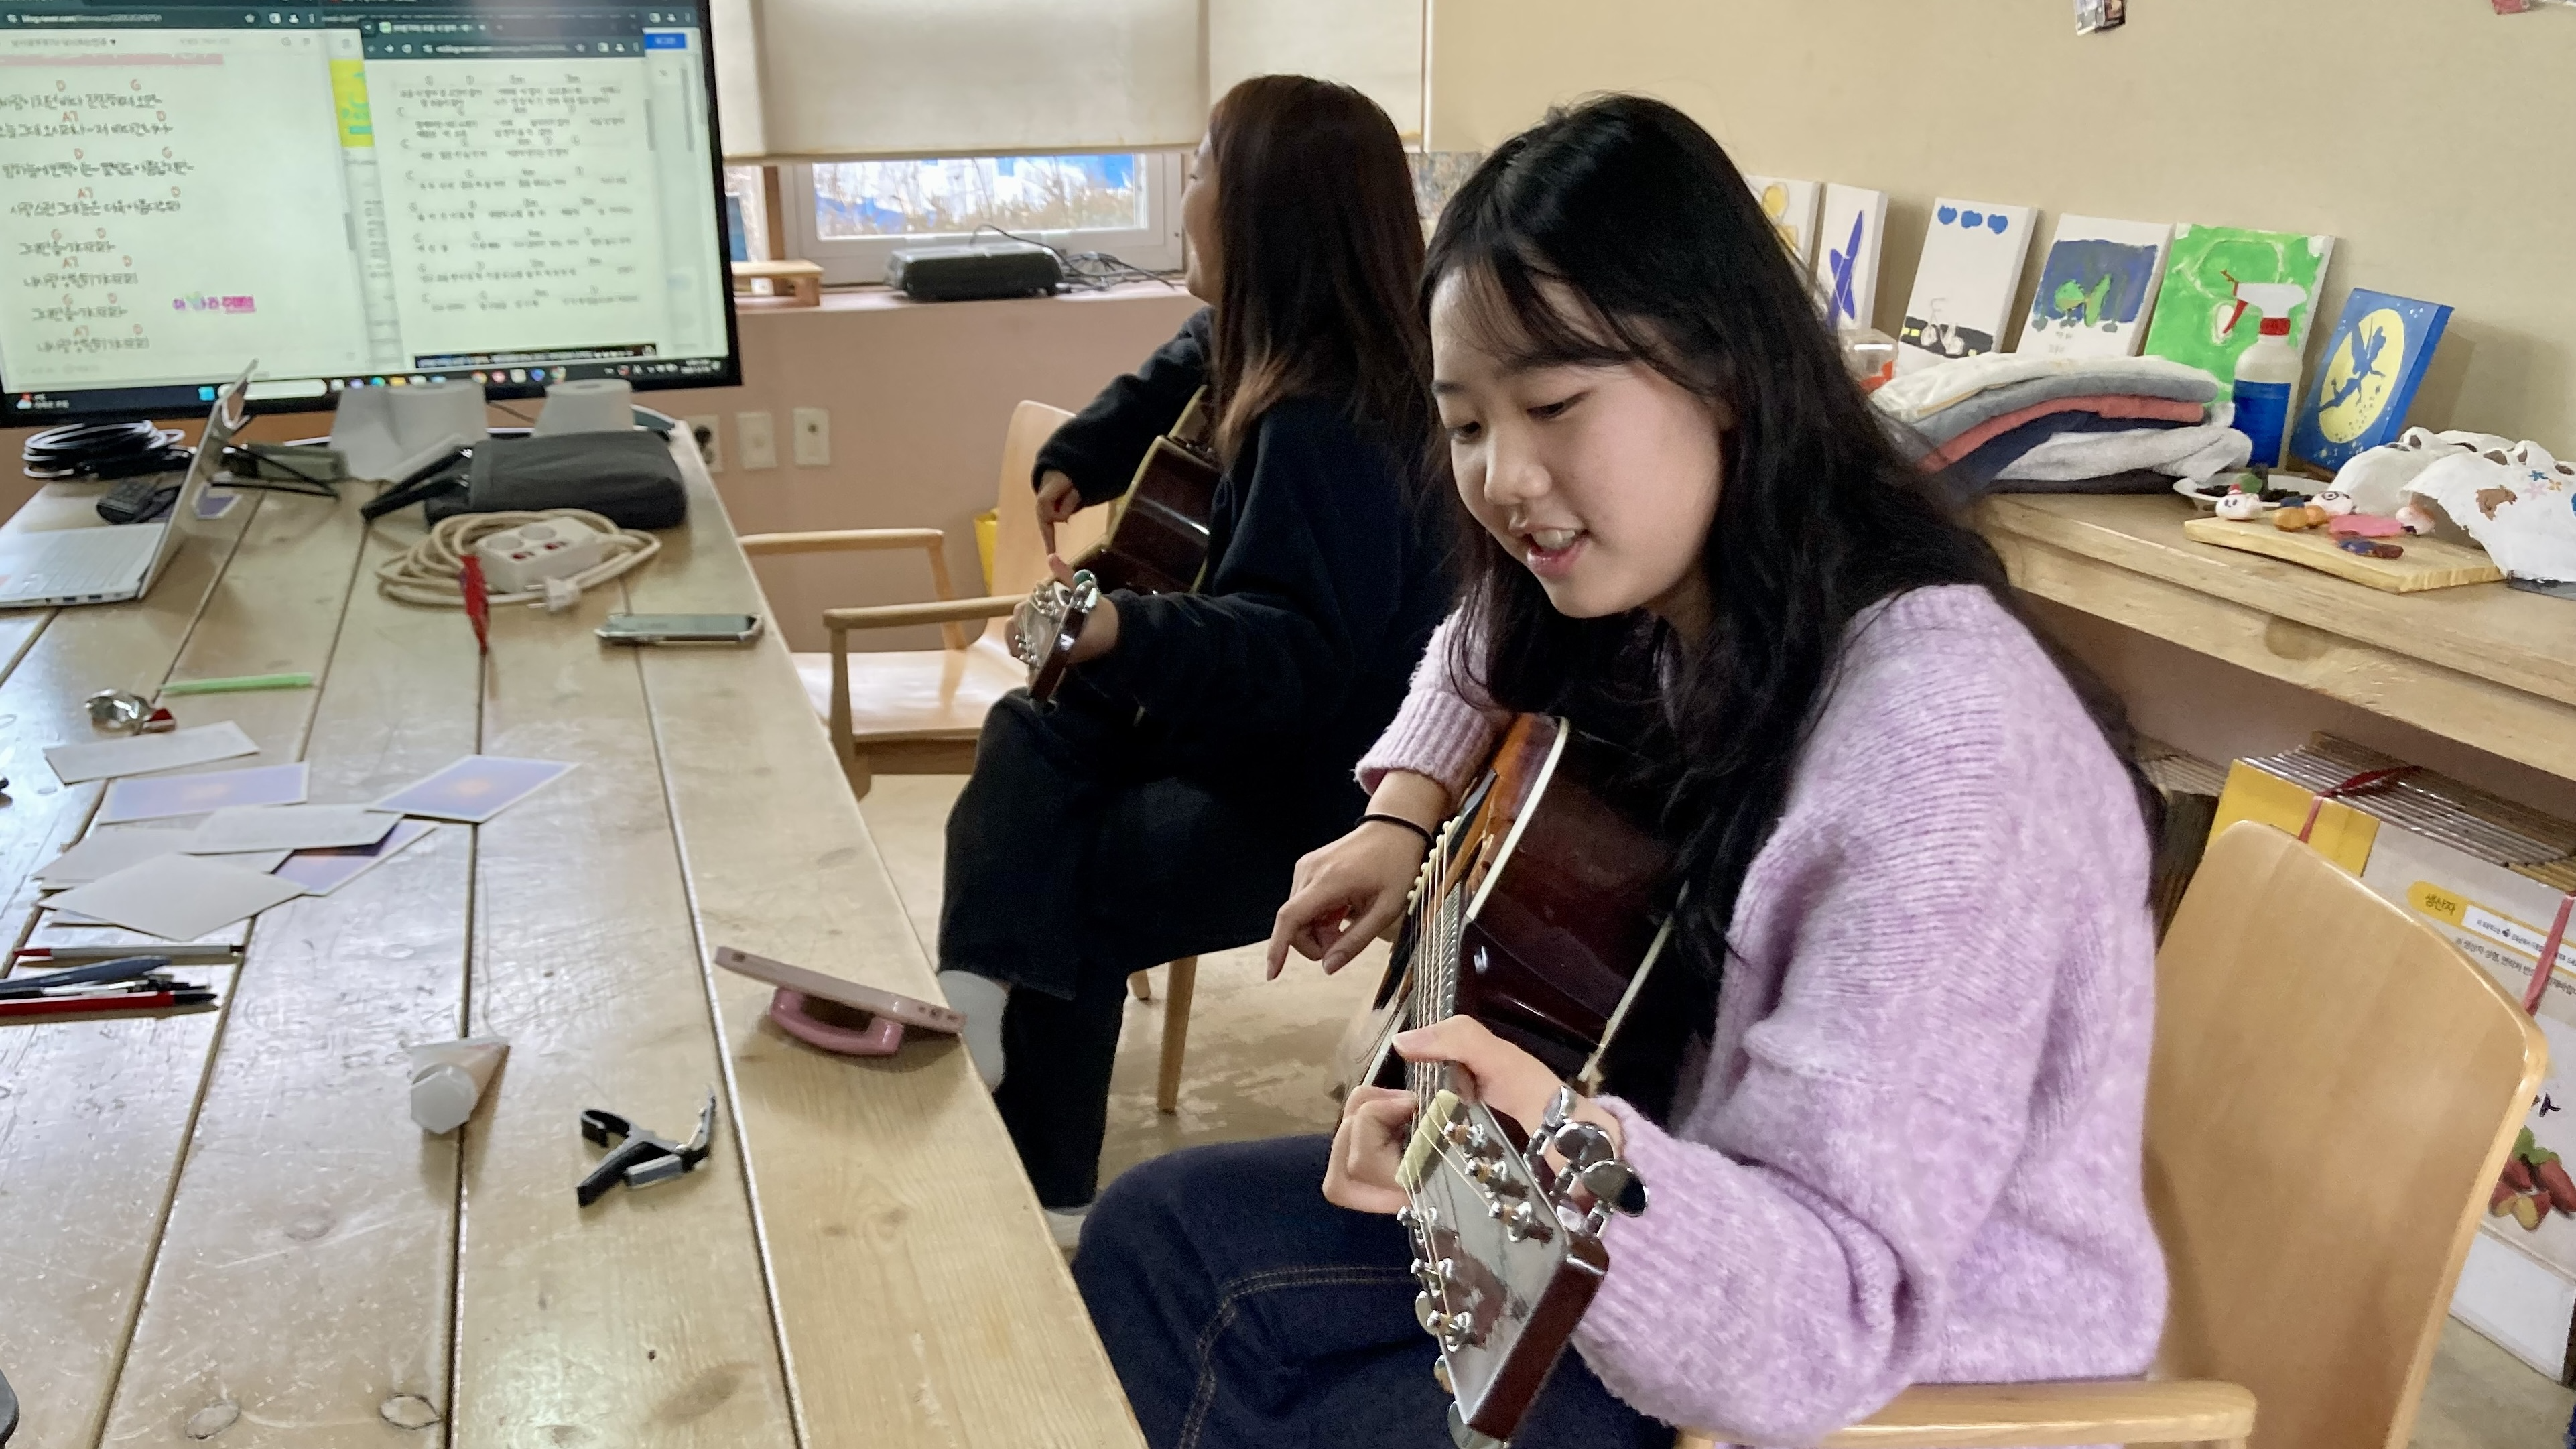 In South Korea, an experimental school prioritizes happiness